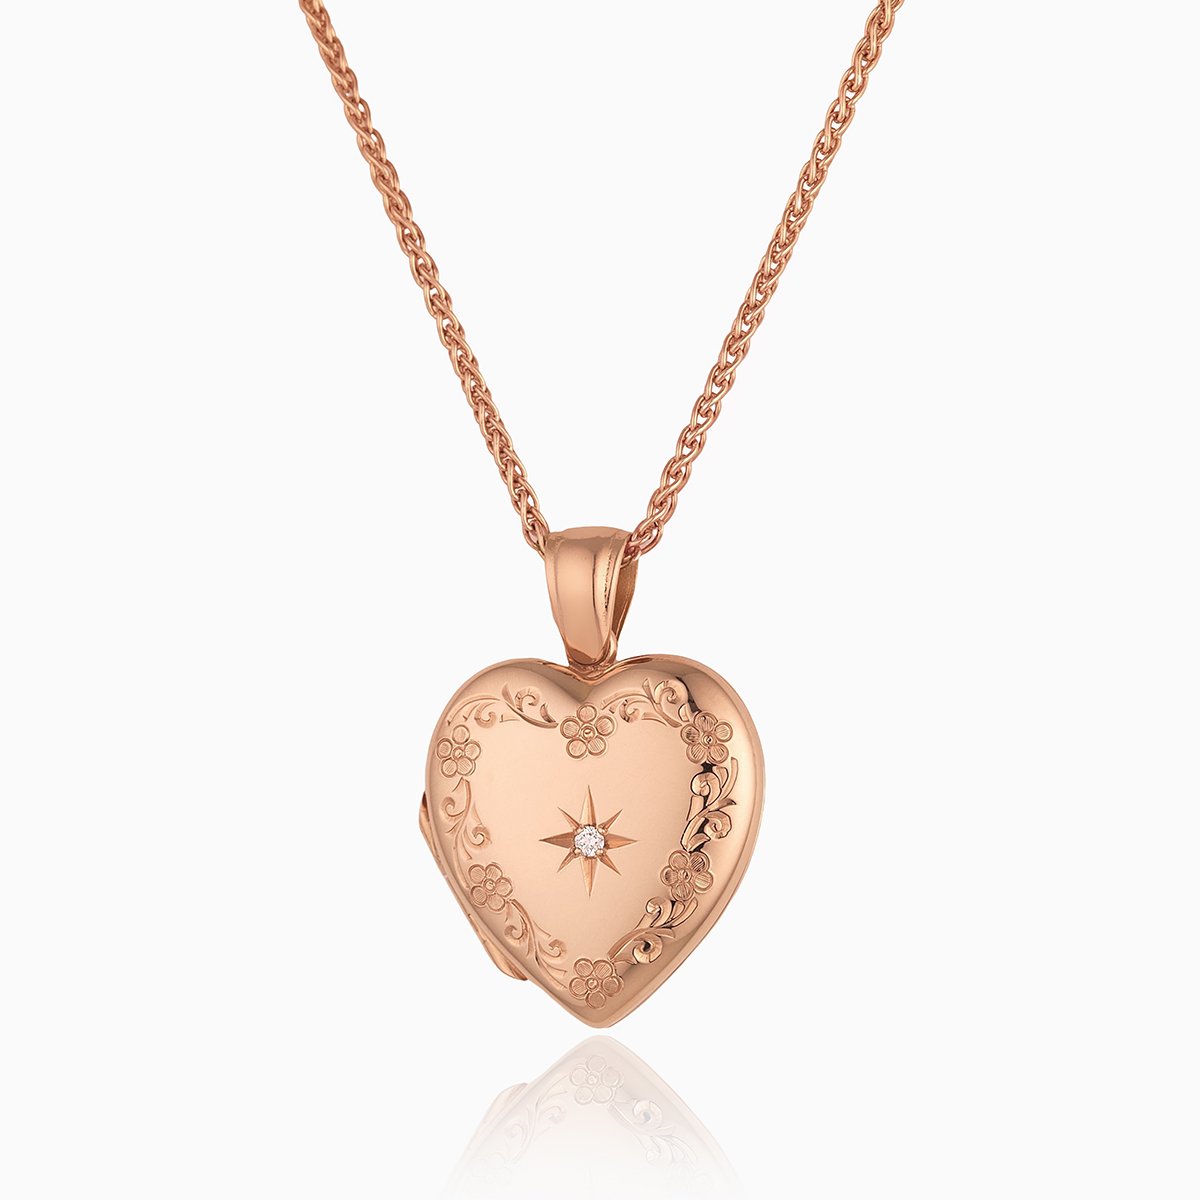 18 ct rose gold heart locket engraved with a floral border and star set with a diamond, on an 18 ct rose gold spiga chain